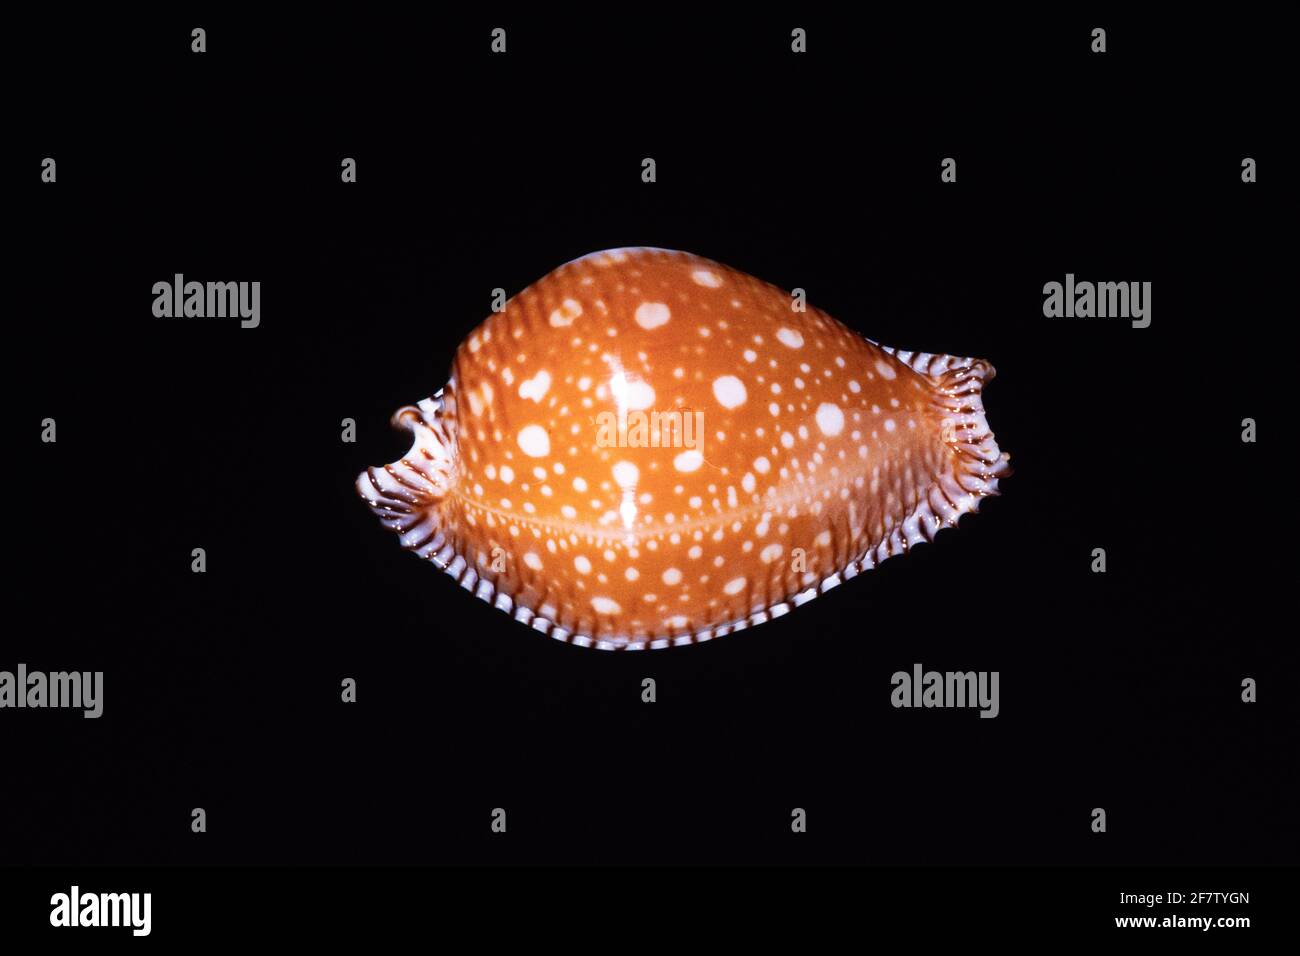 Great Spotted Cowry, Perisserosa guttata, a sea snail found in the South China Sea, from Japan south to Australia. Stock Photo